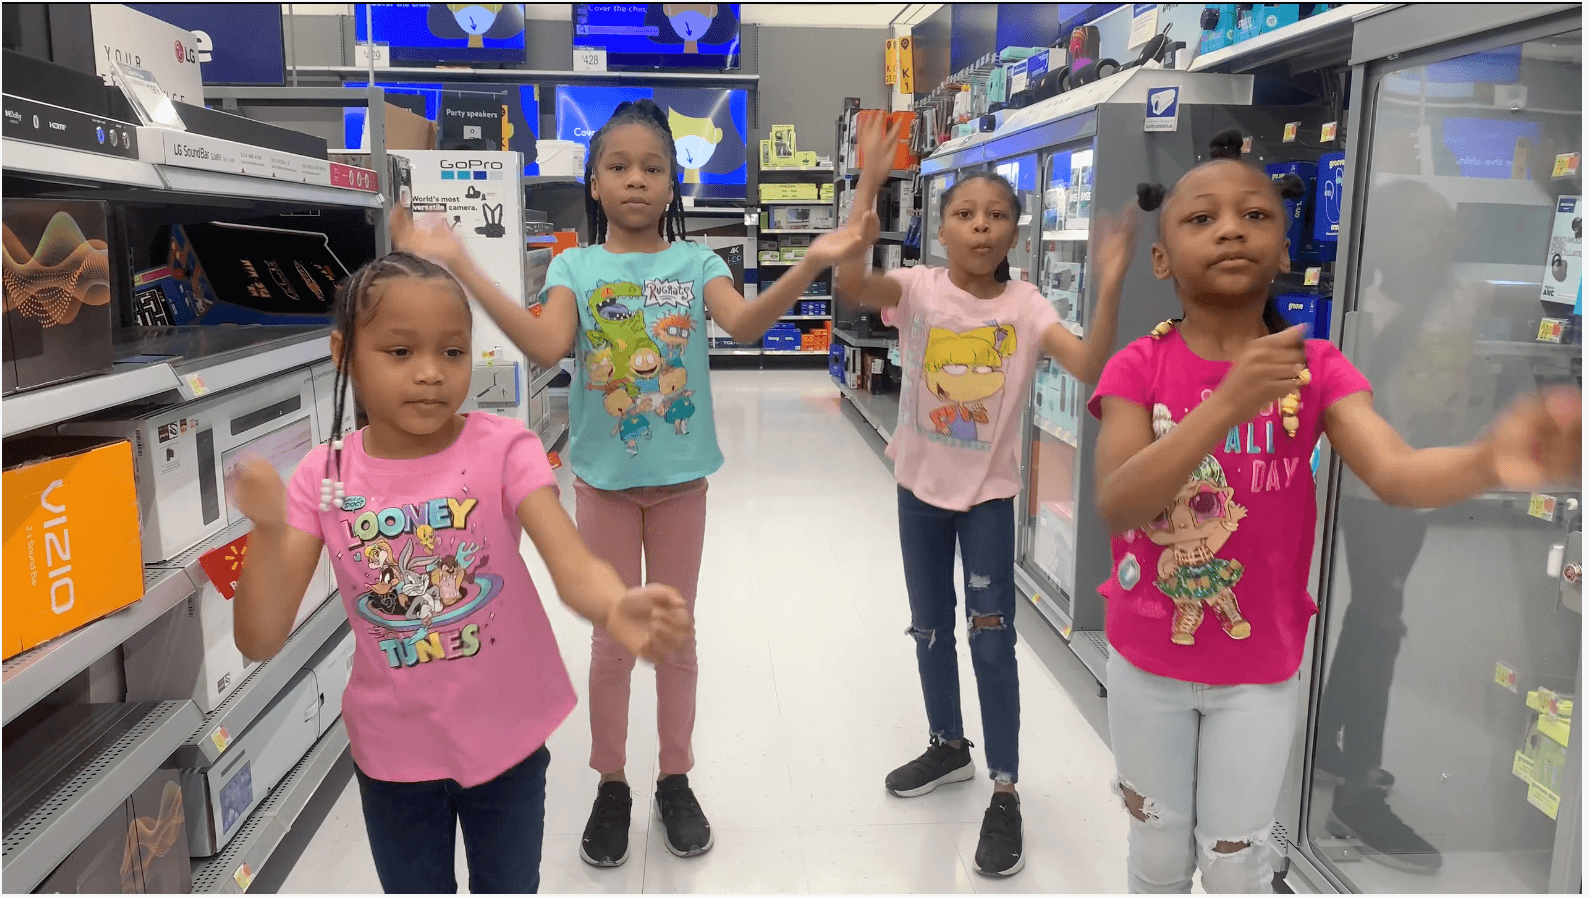 young girls dancing in the electronic aisle of a store